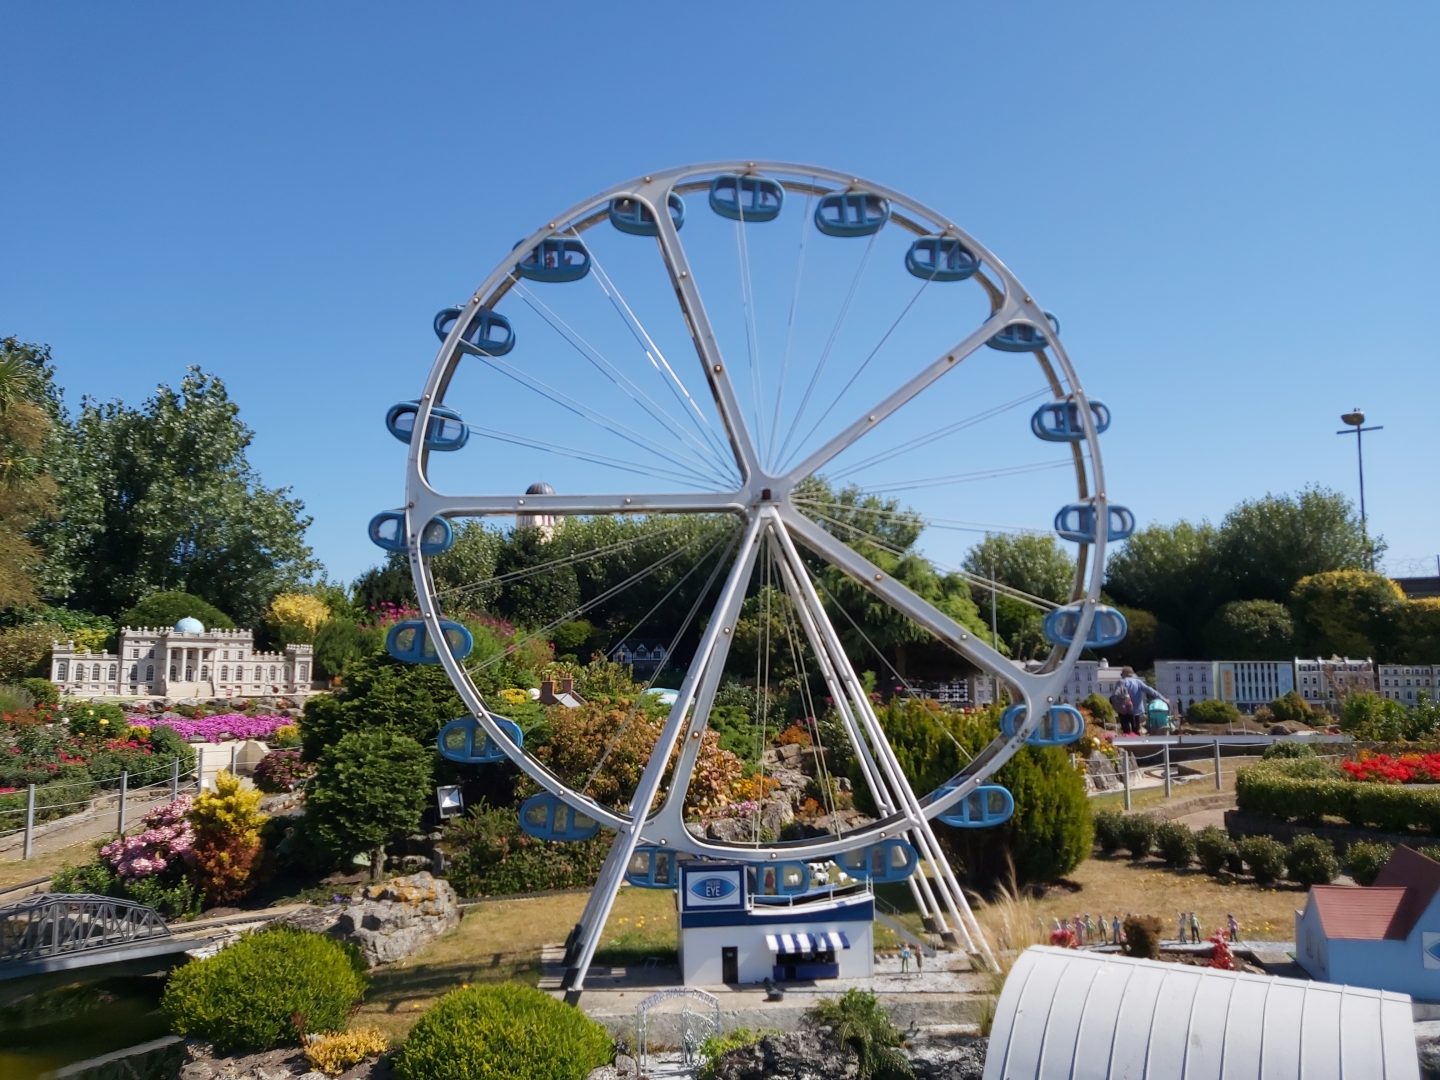 Replica of the Great Yarmouth Ferris Wheel in the Merrivale Model Village